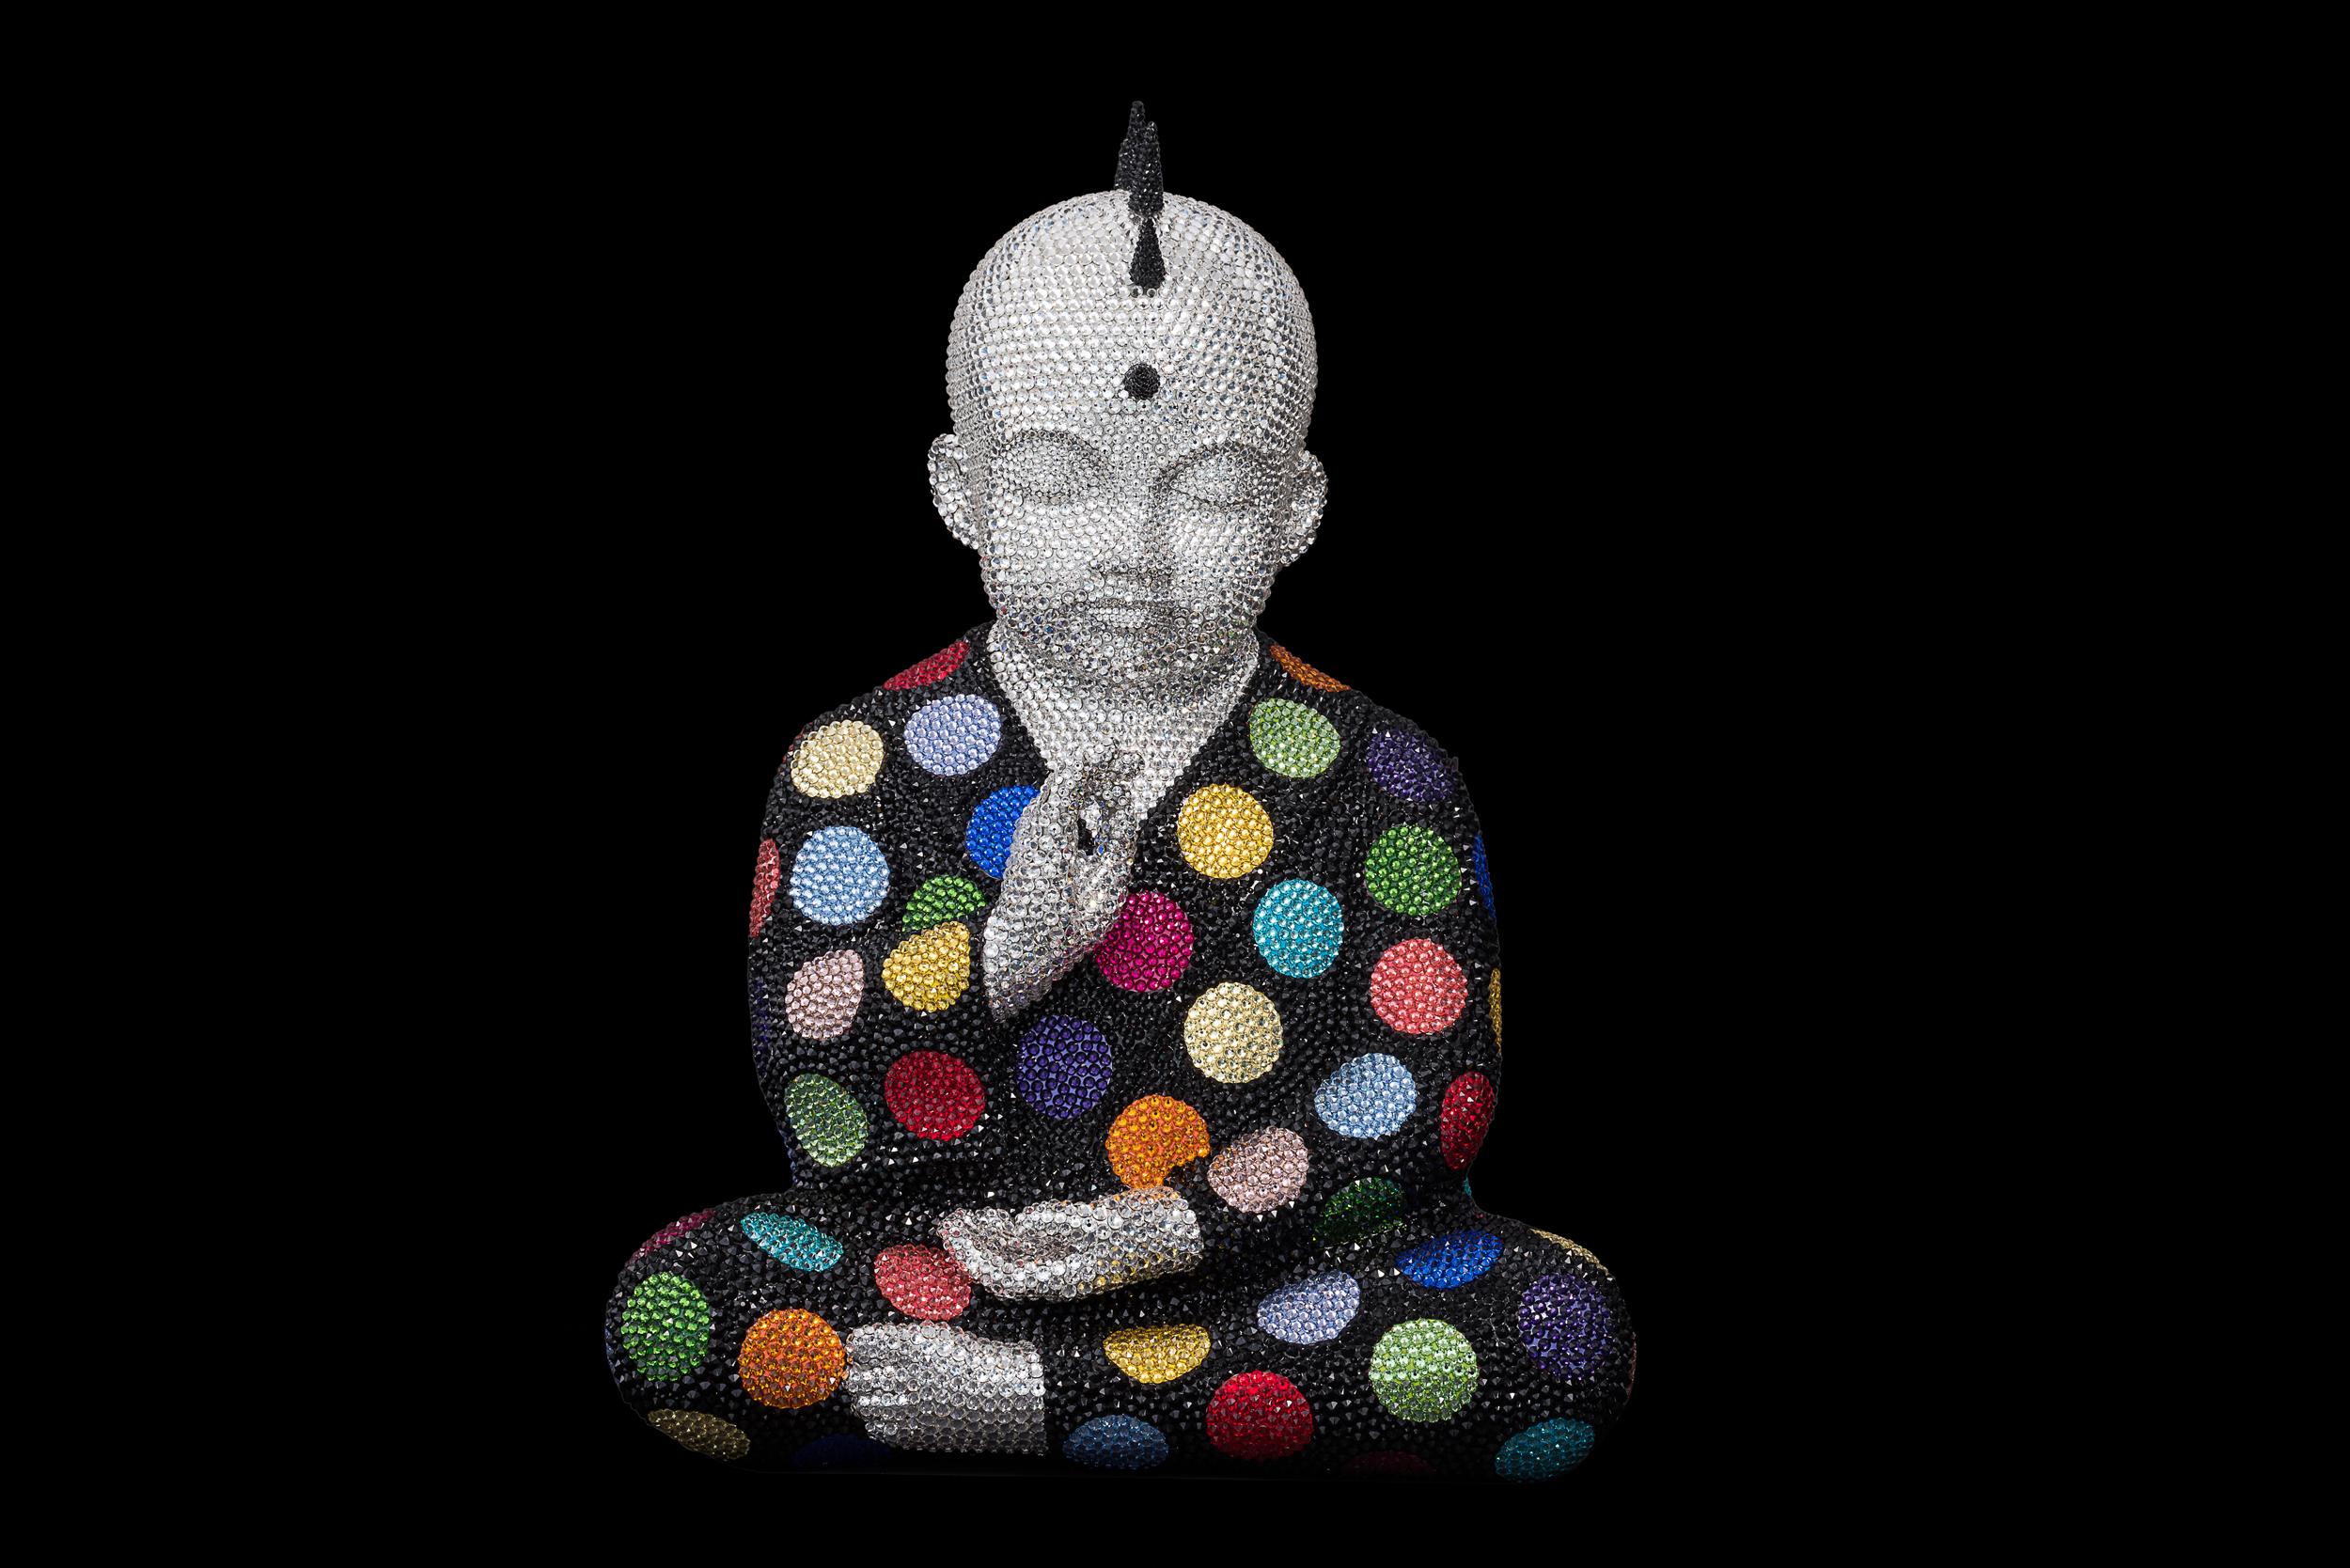 PUNKBUDDHA Large "DOTS IN BLACK" feat. Hirst - Sculpture by Metis Atash